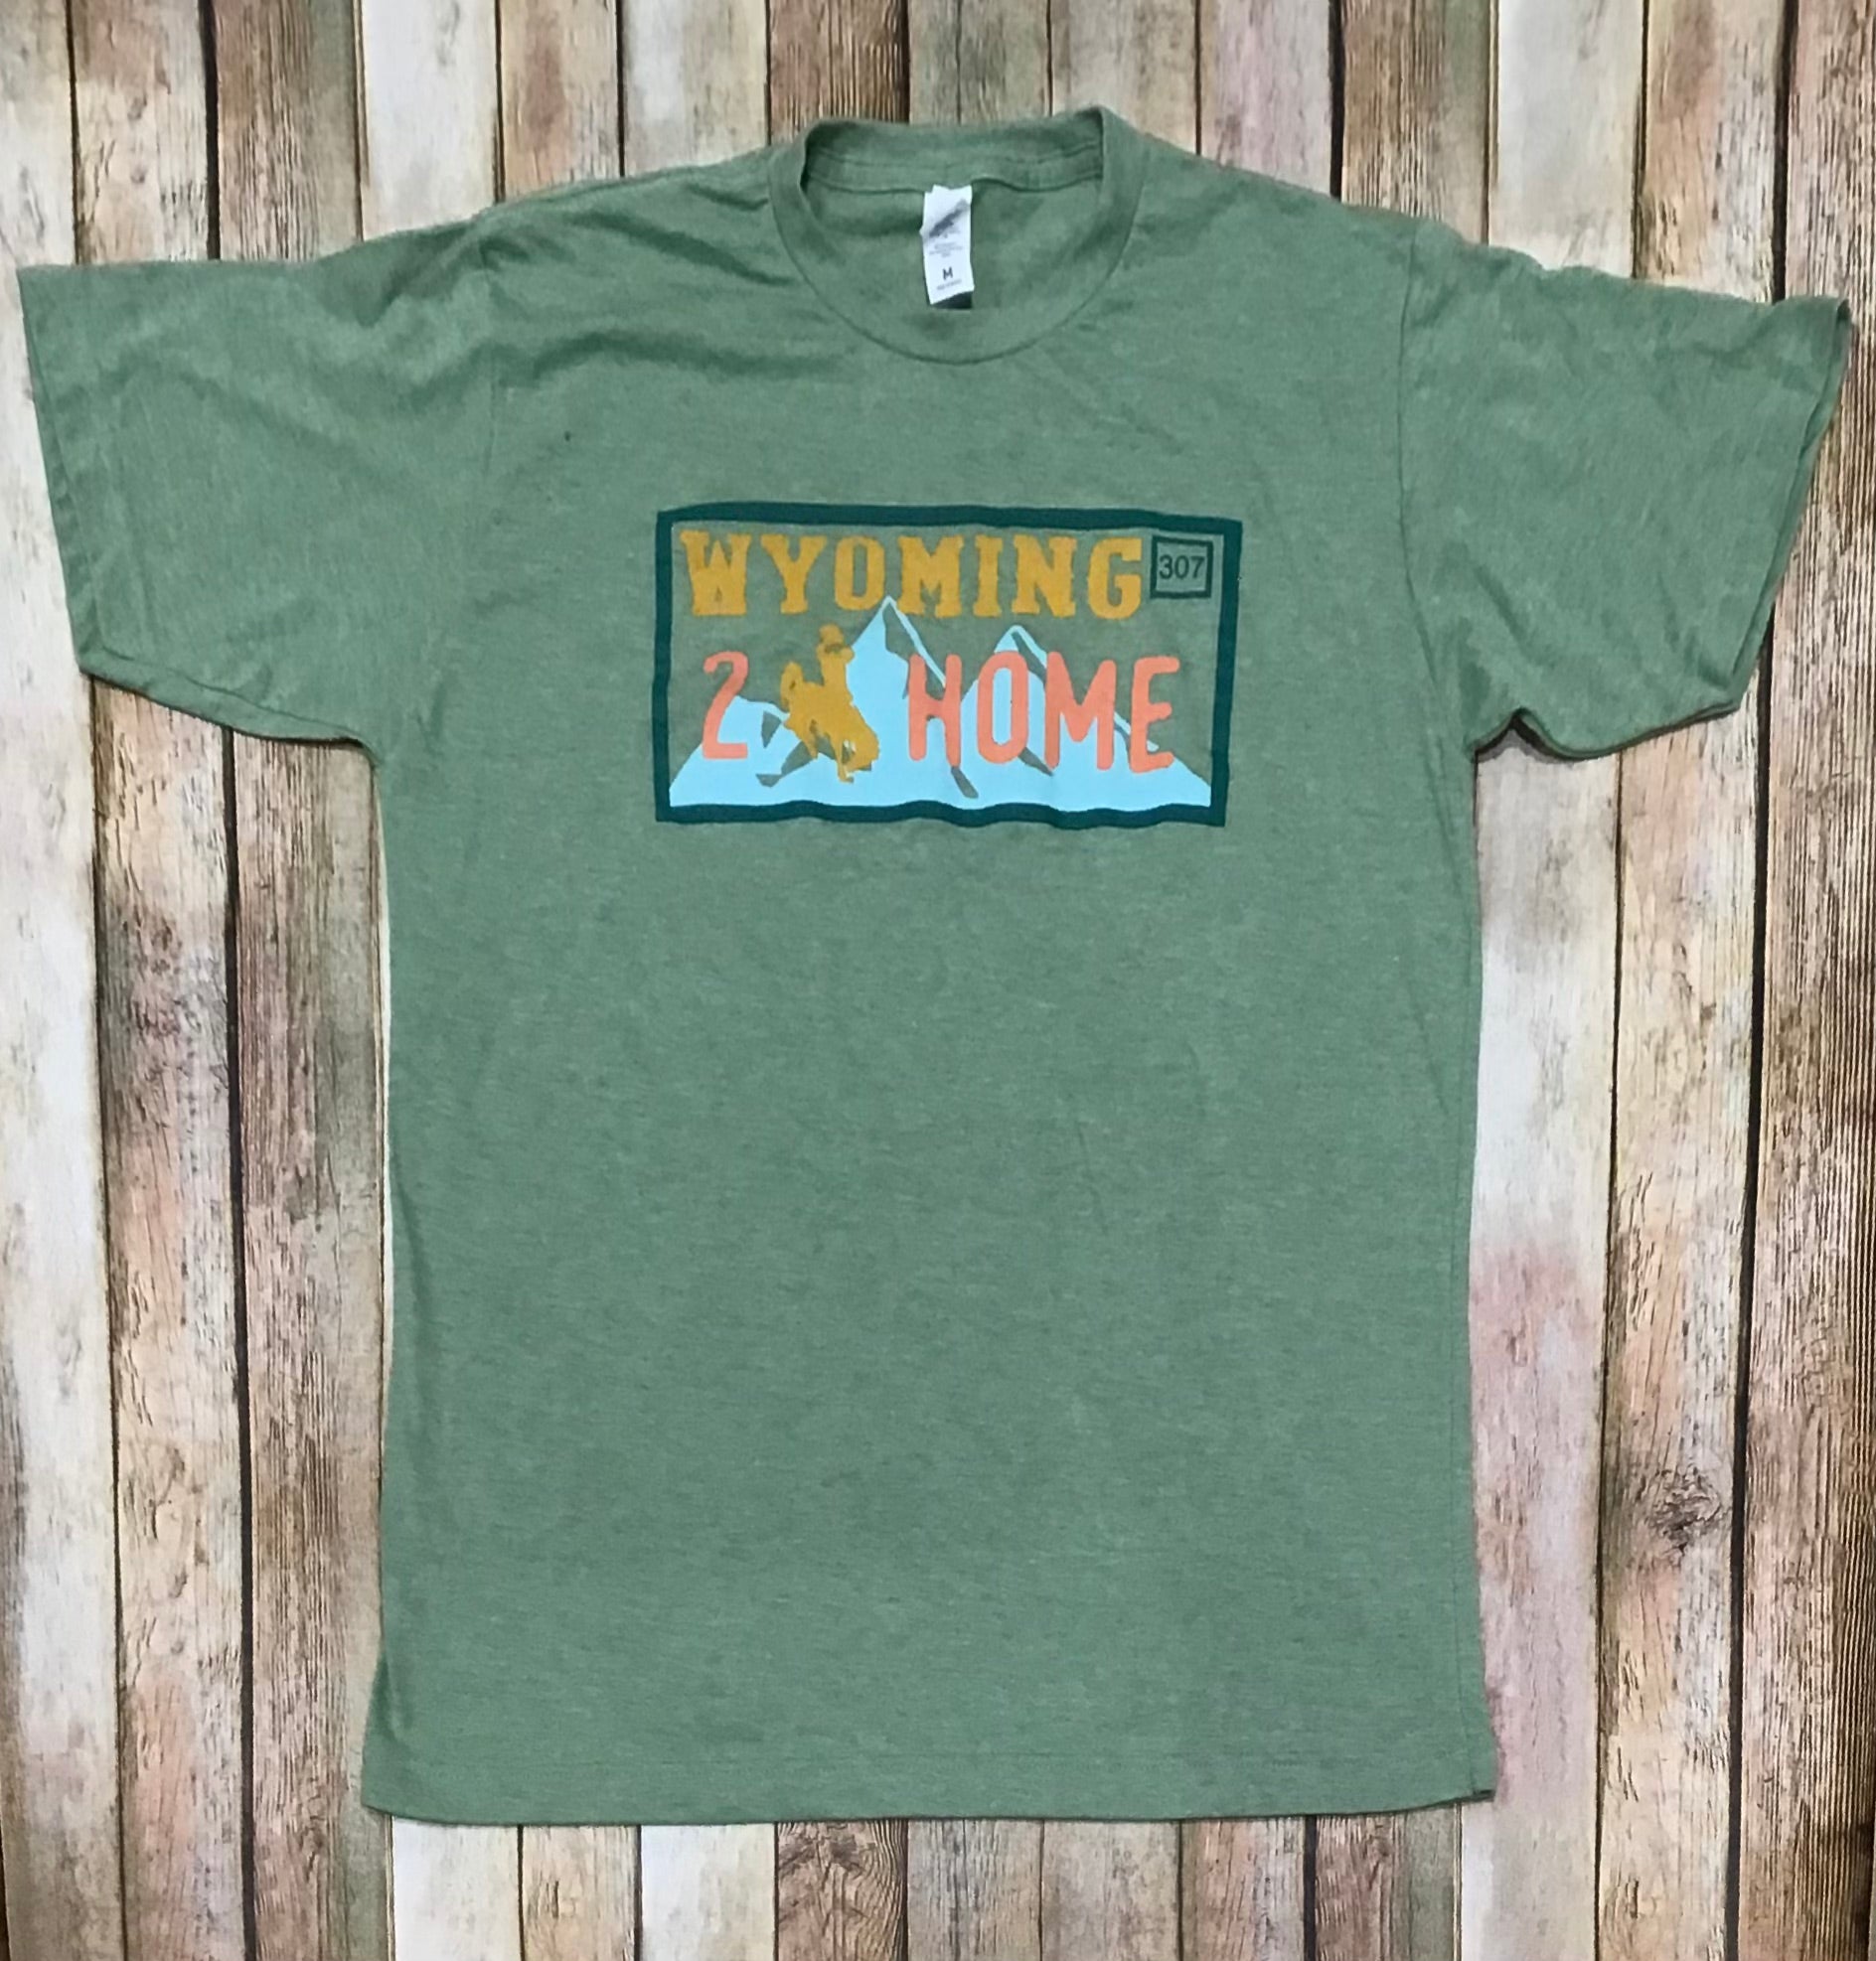 Co. 2 License Plate HOME Tee